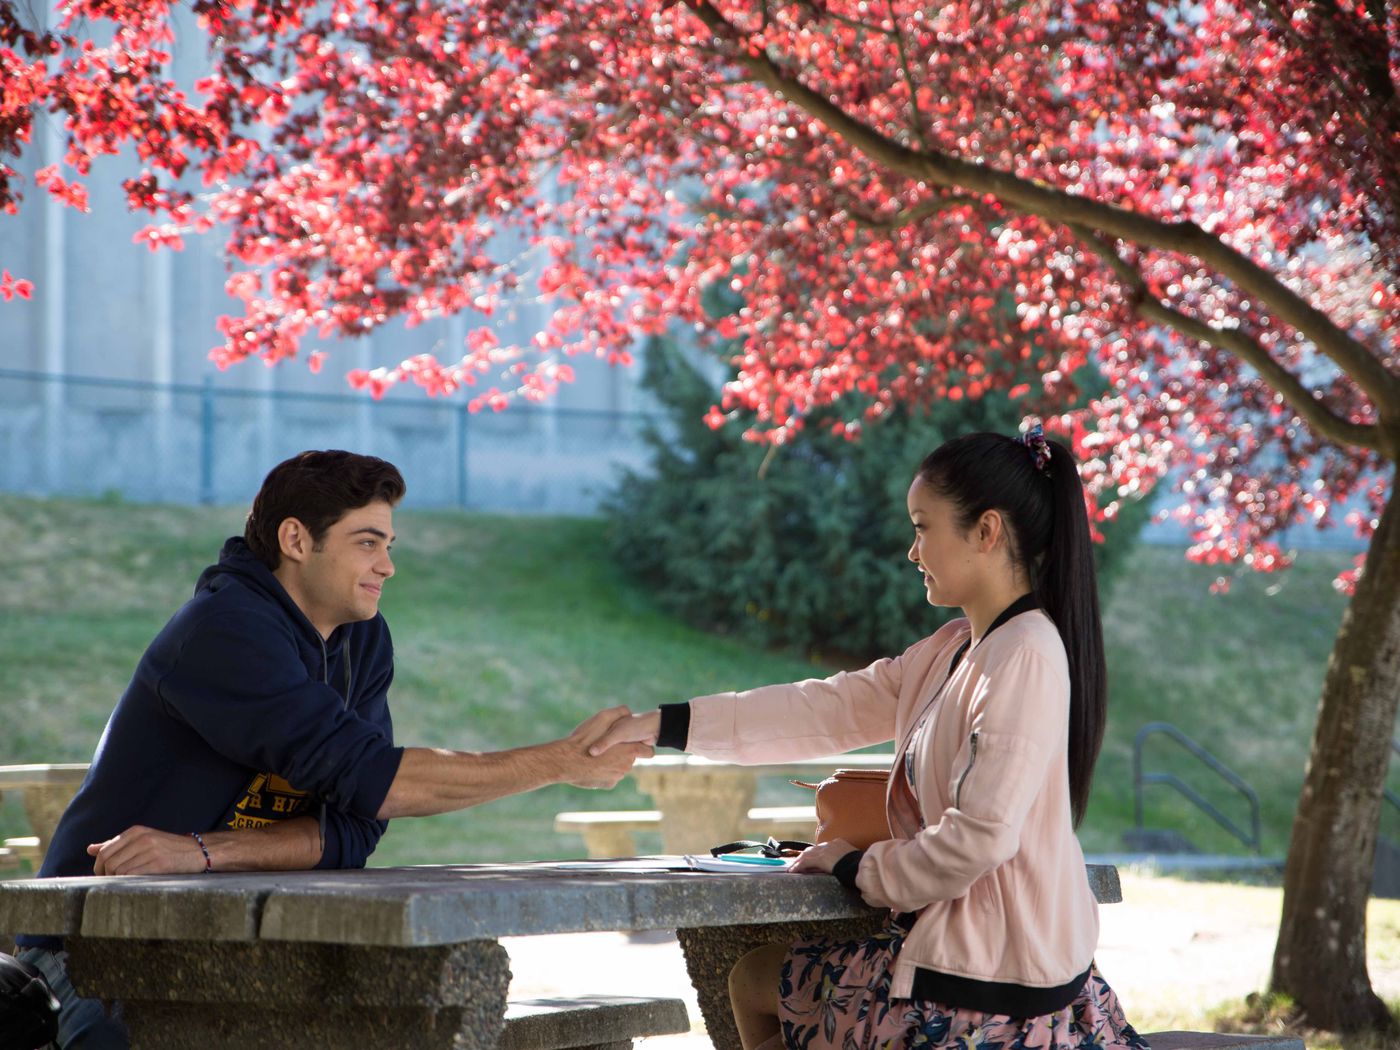 To All The Boys I'Ve Loved Before Wallpapers